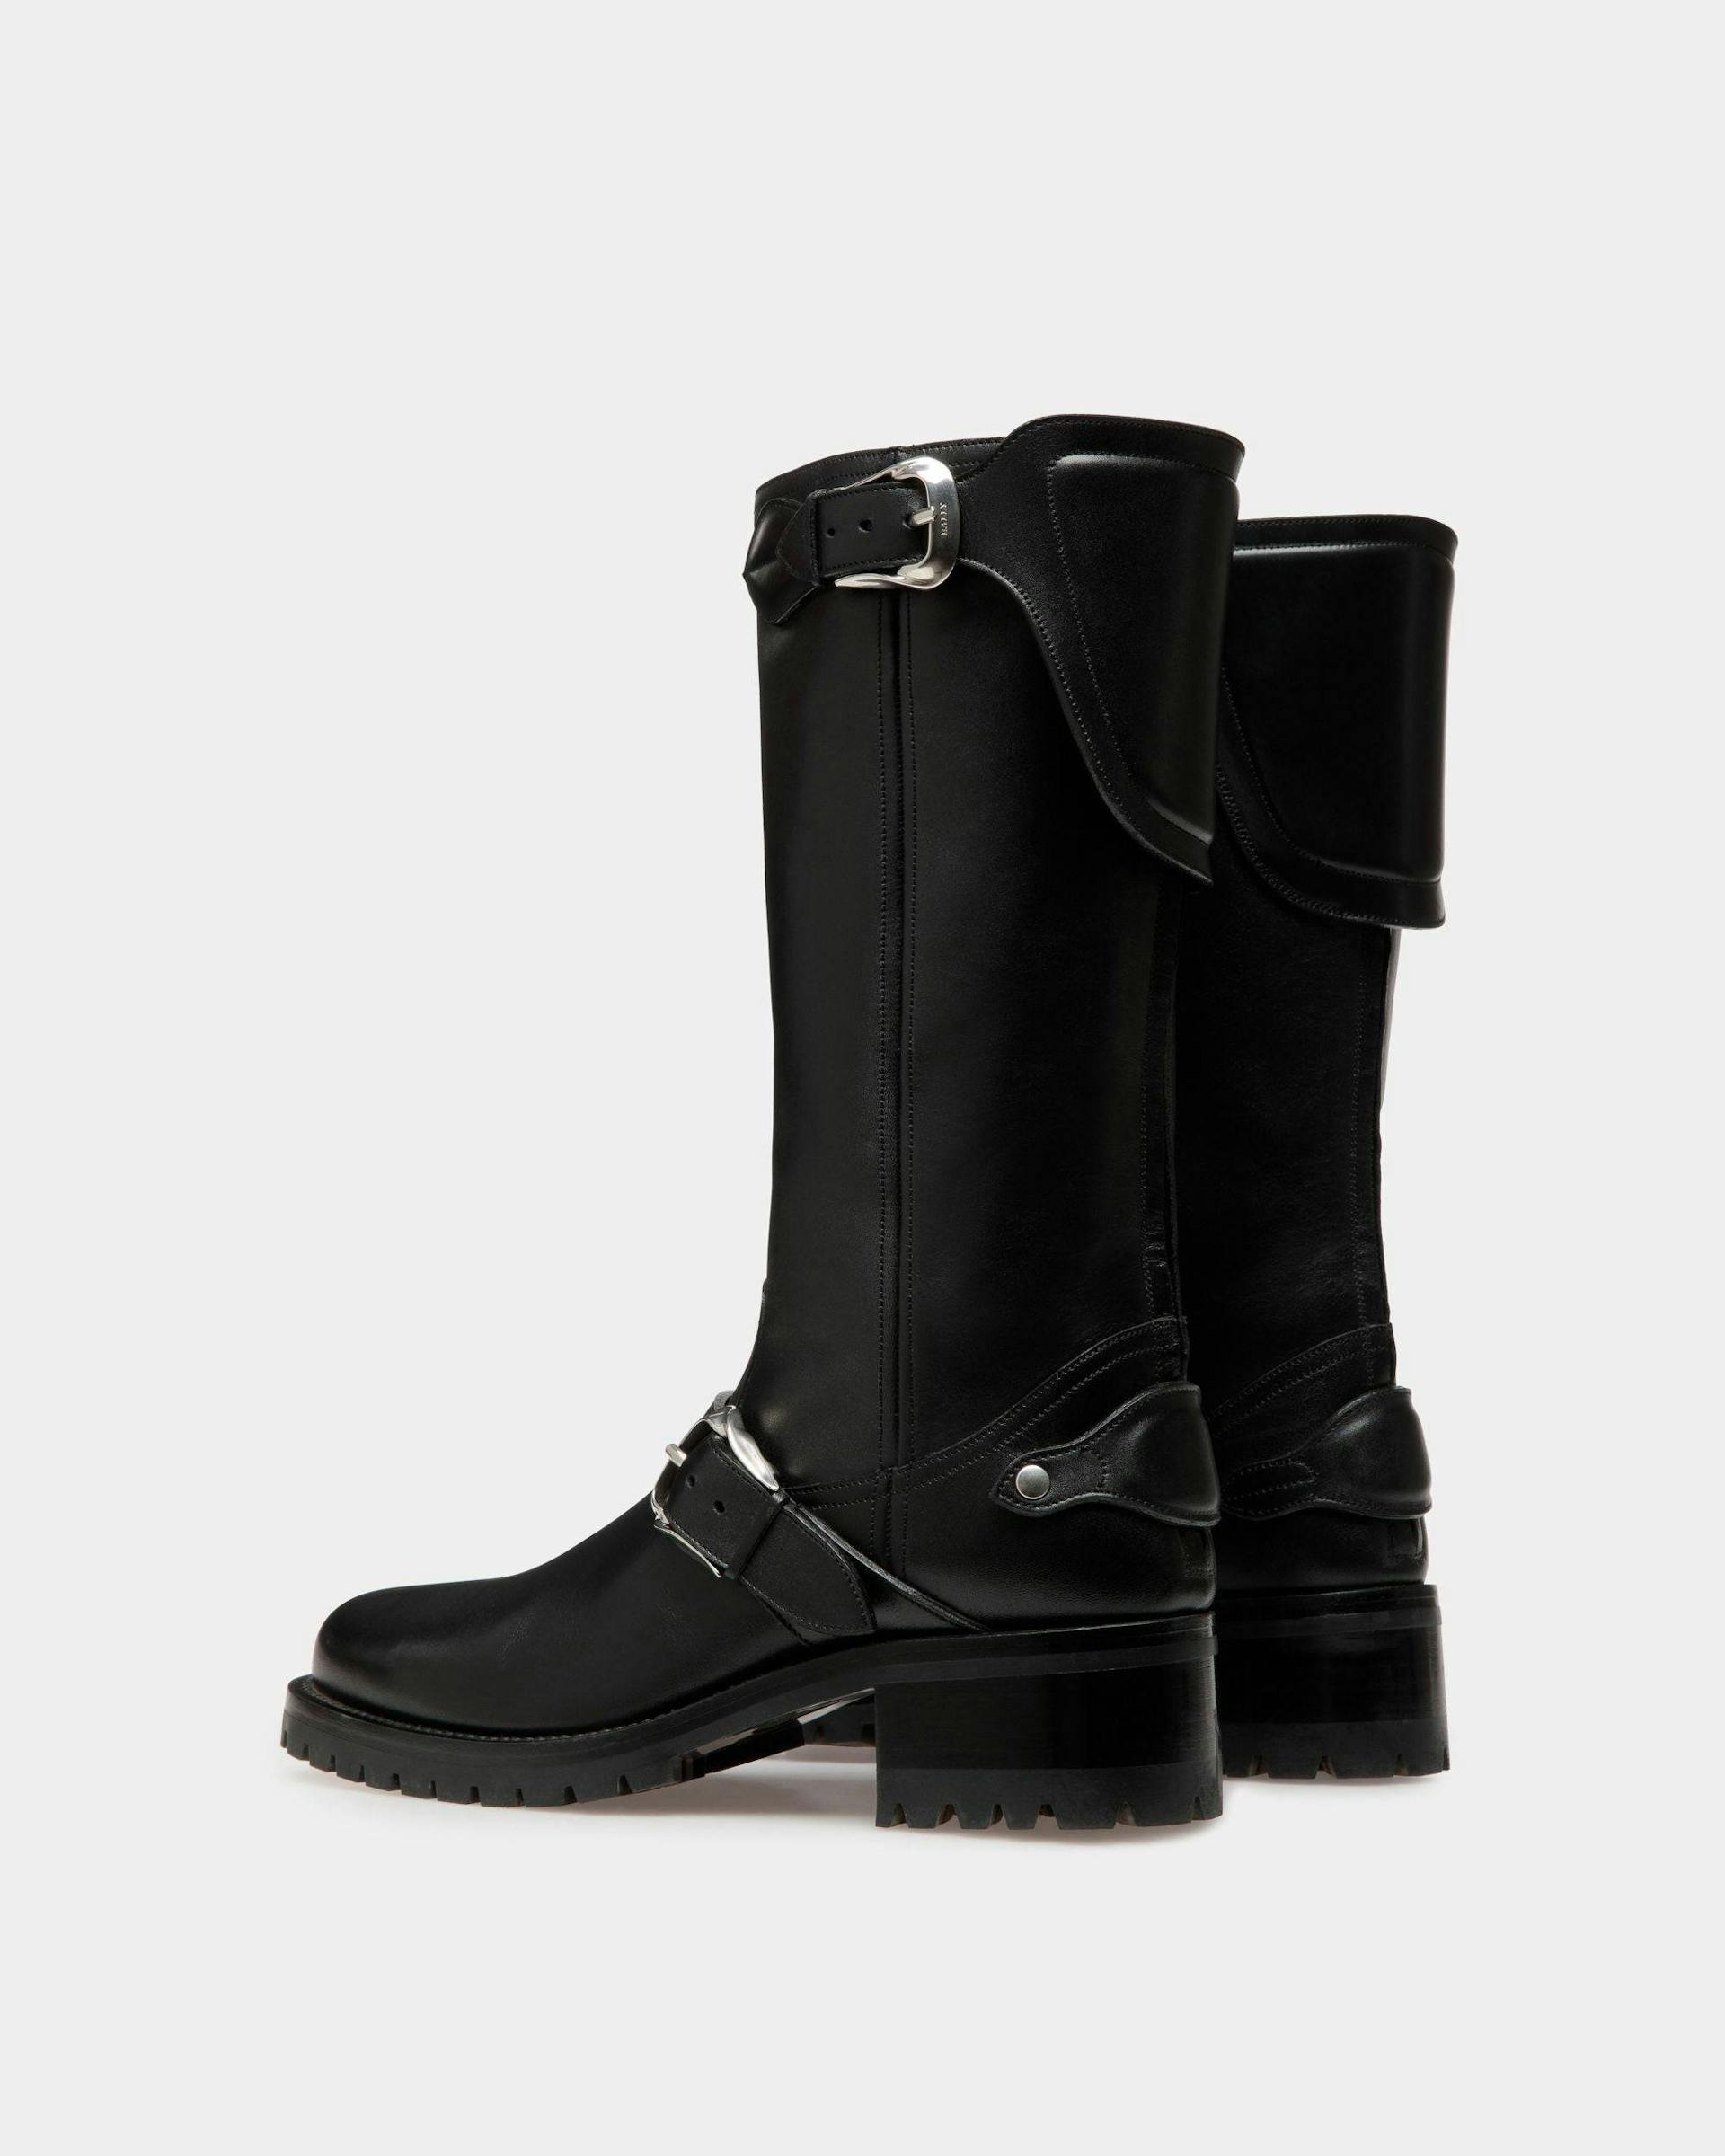 Women's Ardis Long Boots In Black Leather | Bally | Still Life 3/4 Back